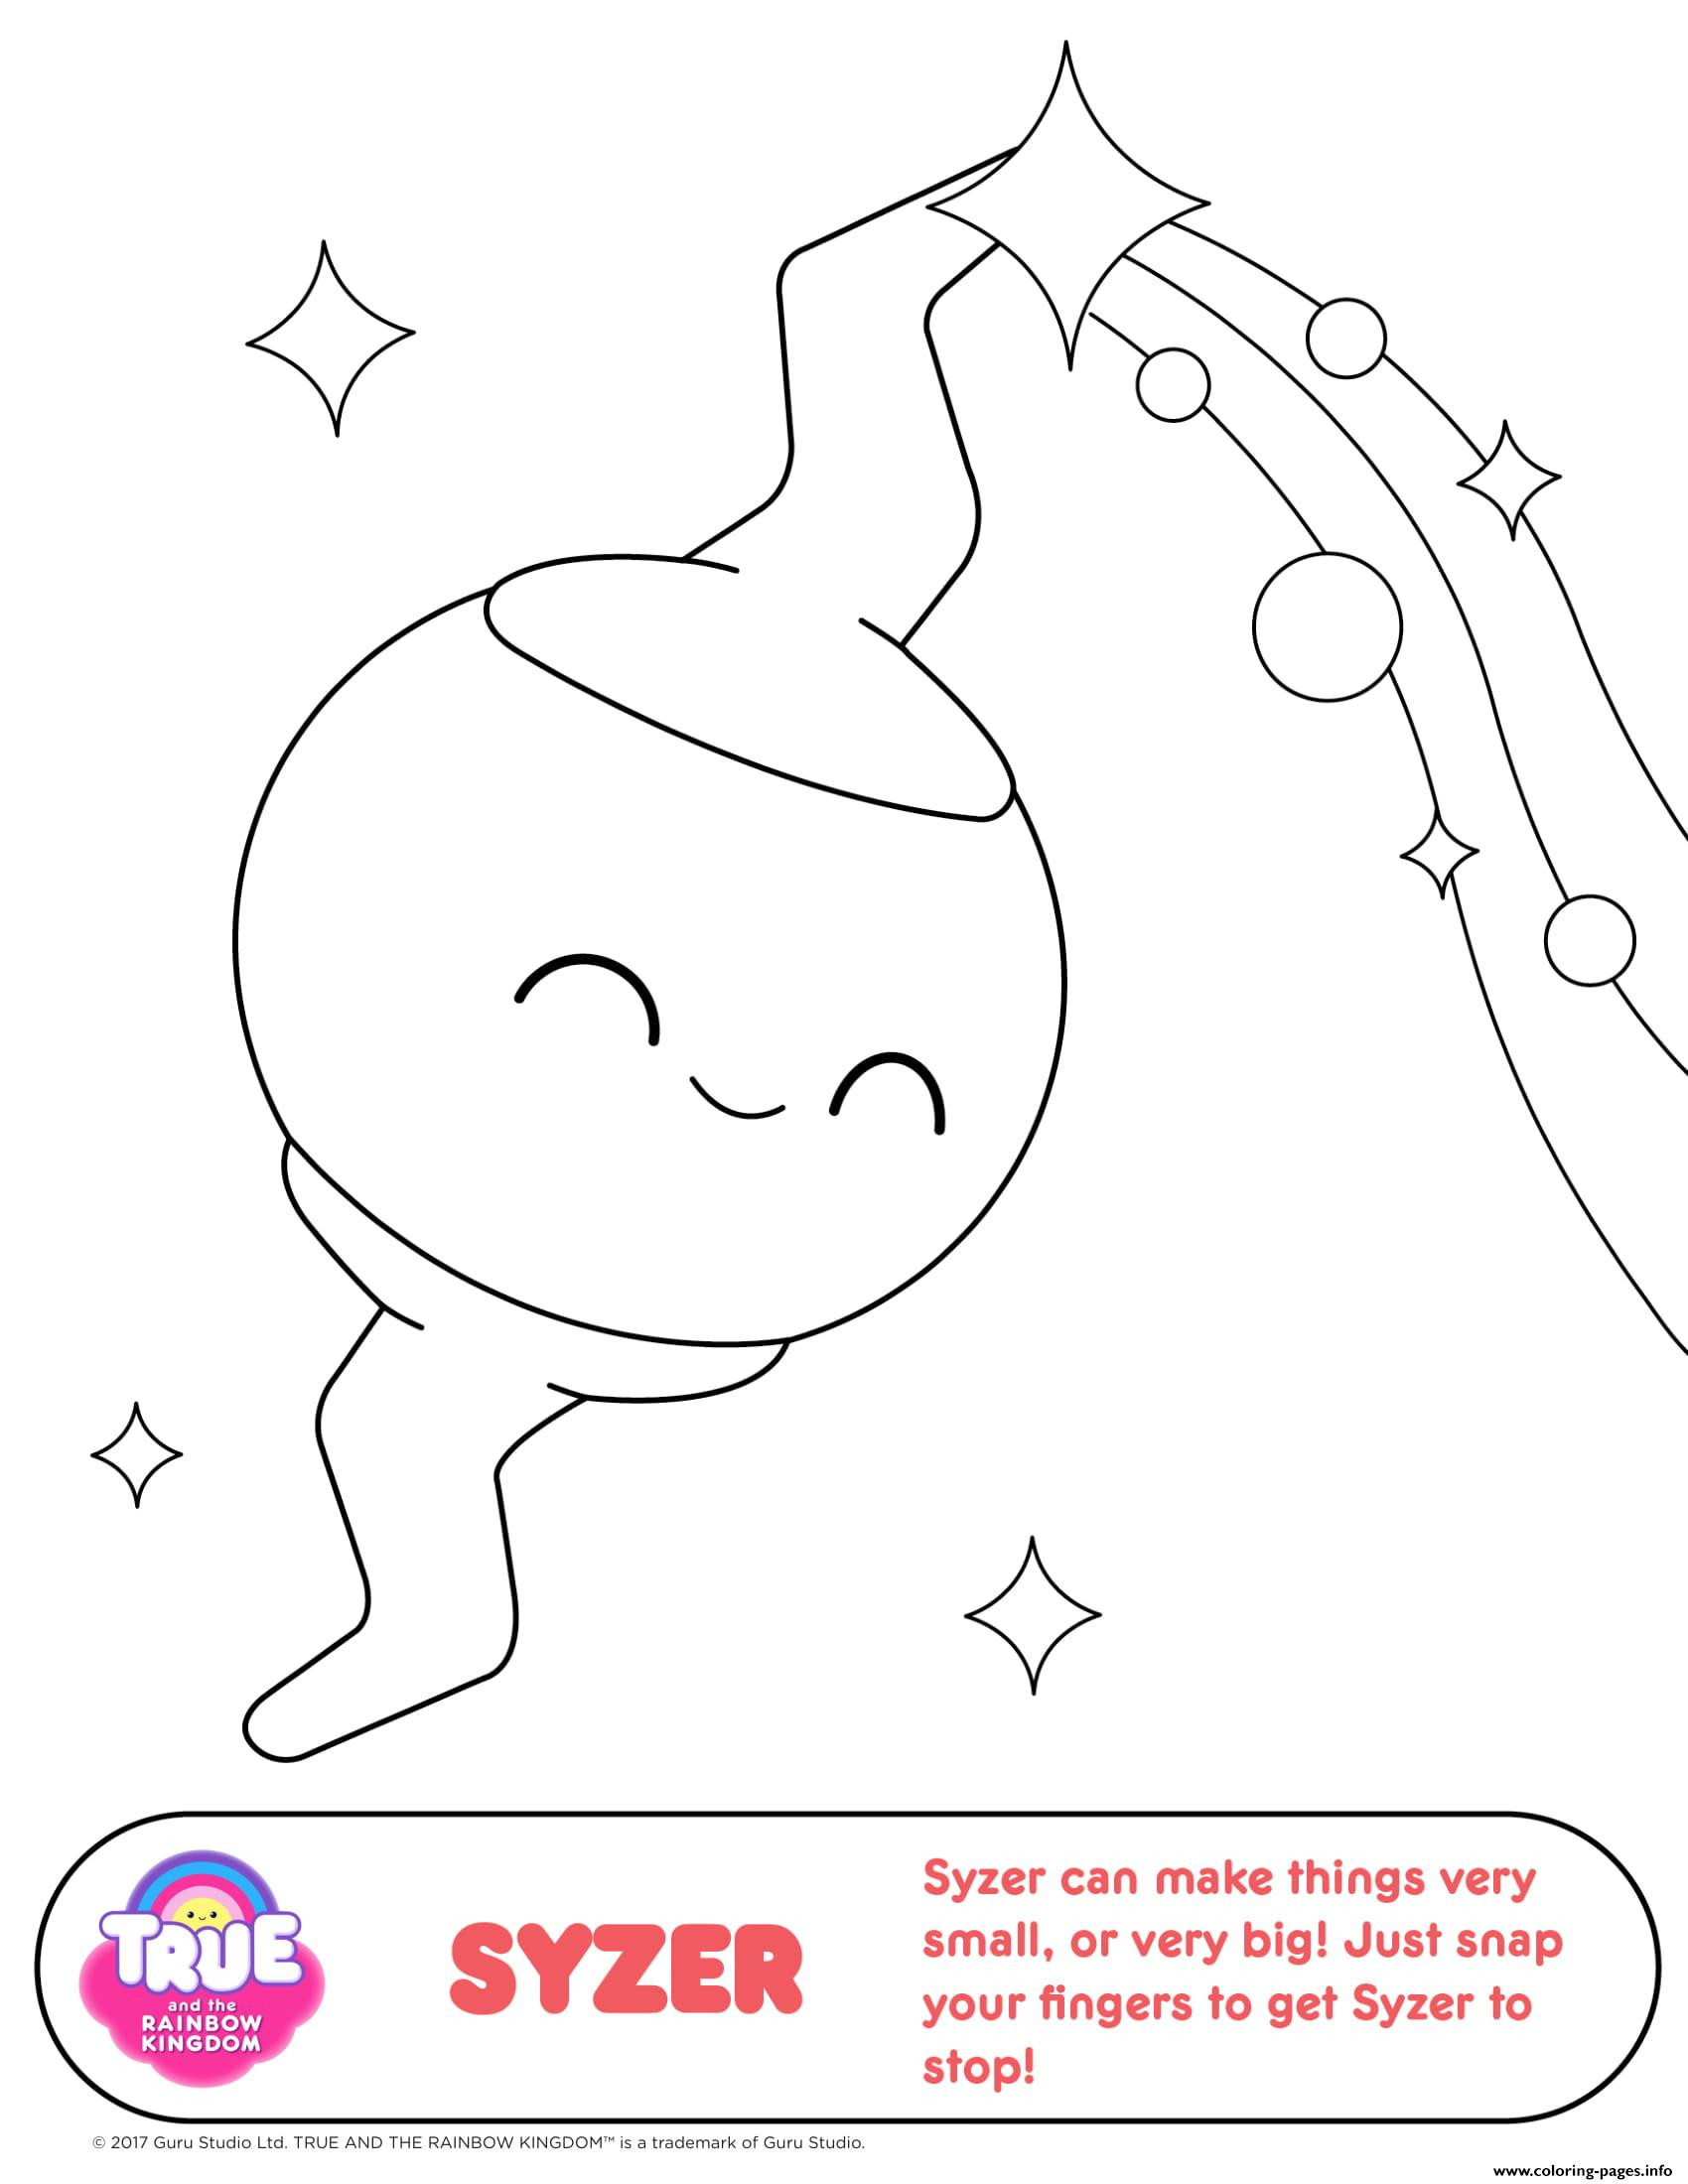 True And The Rainbow Kingdom Coloring Pages
 Syzer 2 1 True And The Rainbow Kingdom Coloring Pages